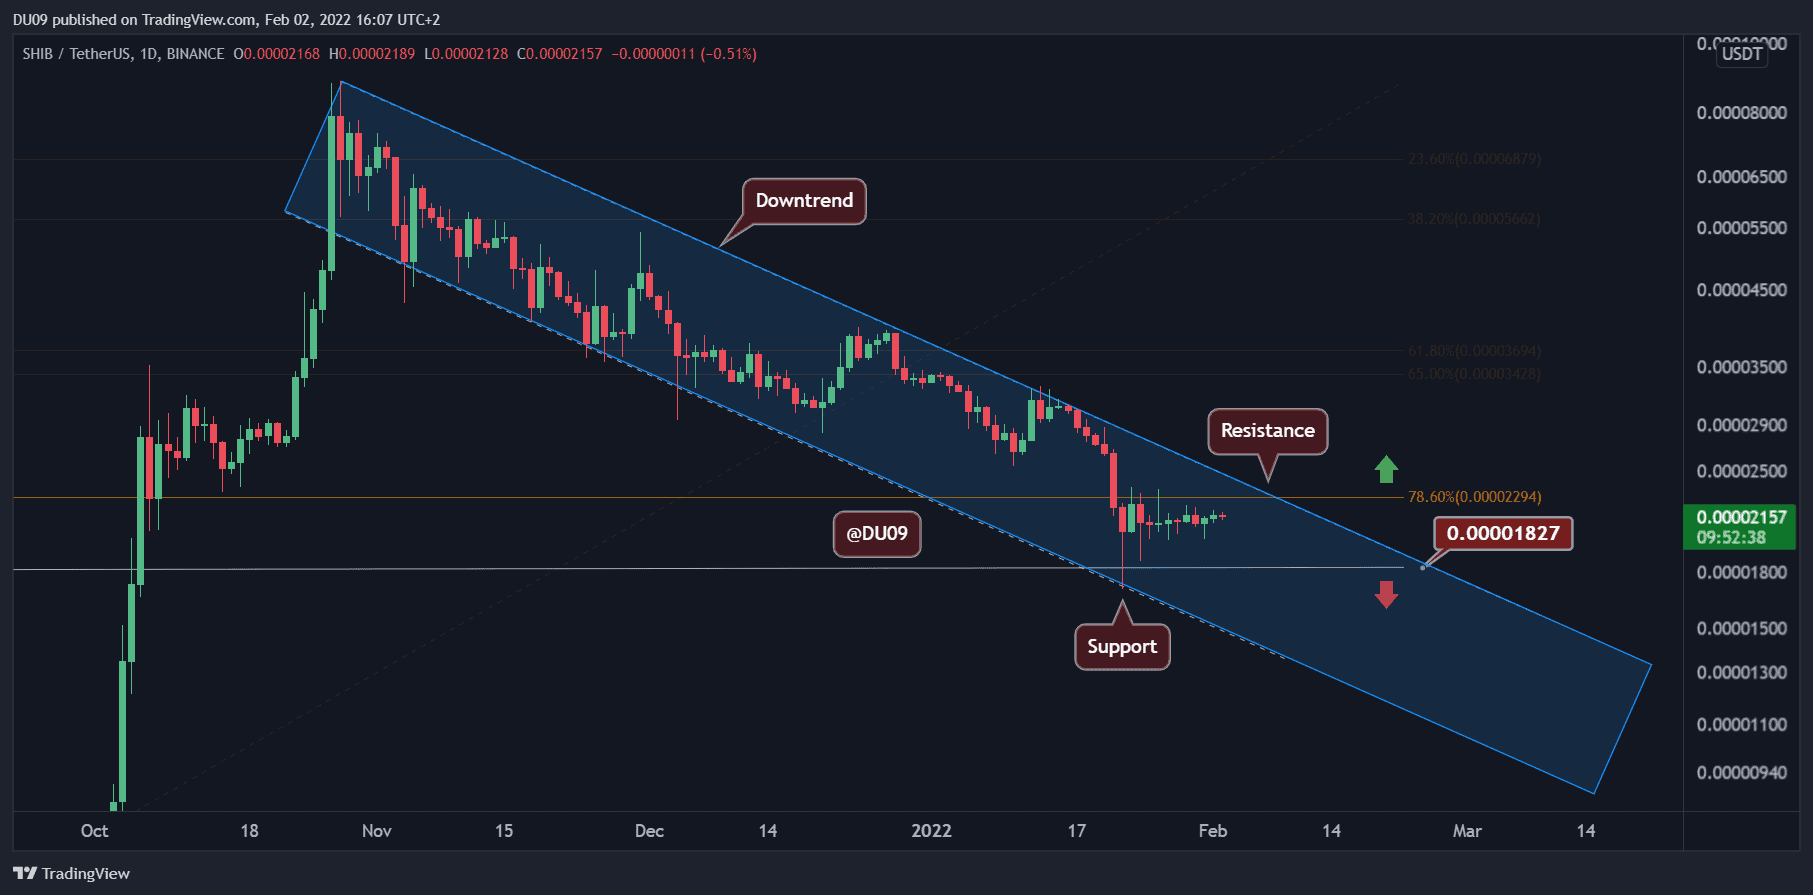 After Days of Consolidation, Is SHIB Breakout Incoming?